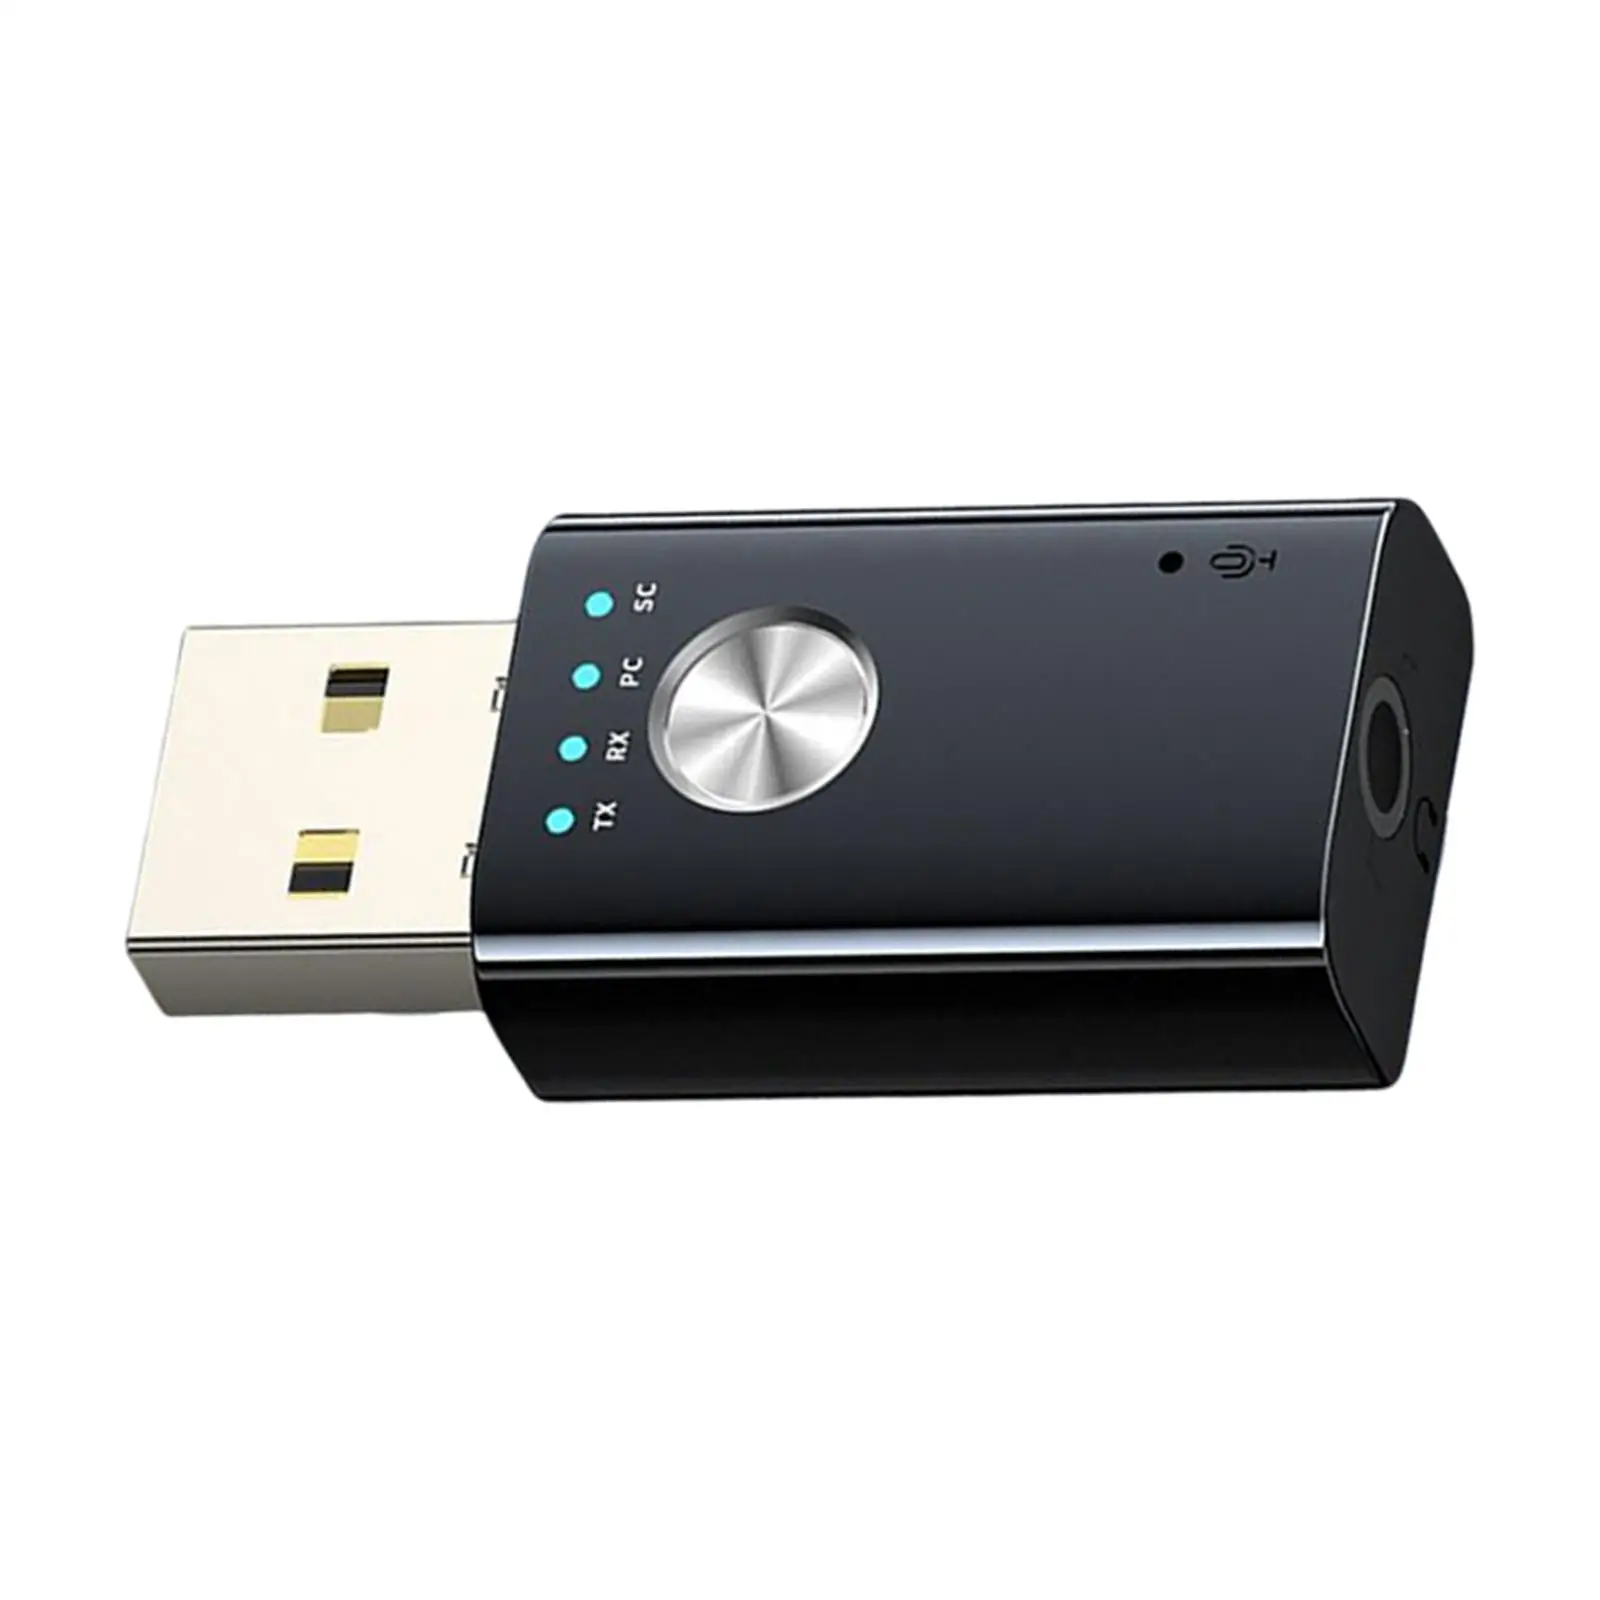 4 in 1 USB Bluetooth 5.0 Transmitter Receiver Stereo Dongle Wireless Audio Auxiliary Adapter for TV PC Headphones USB Powered